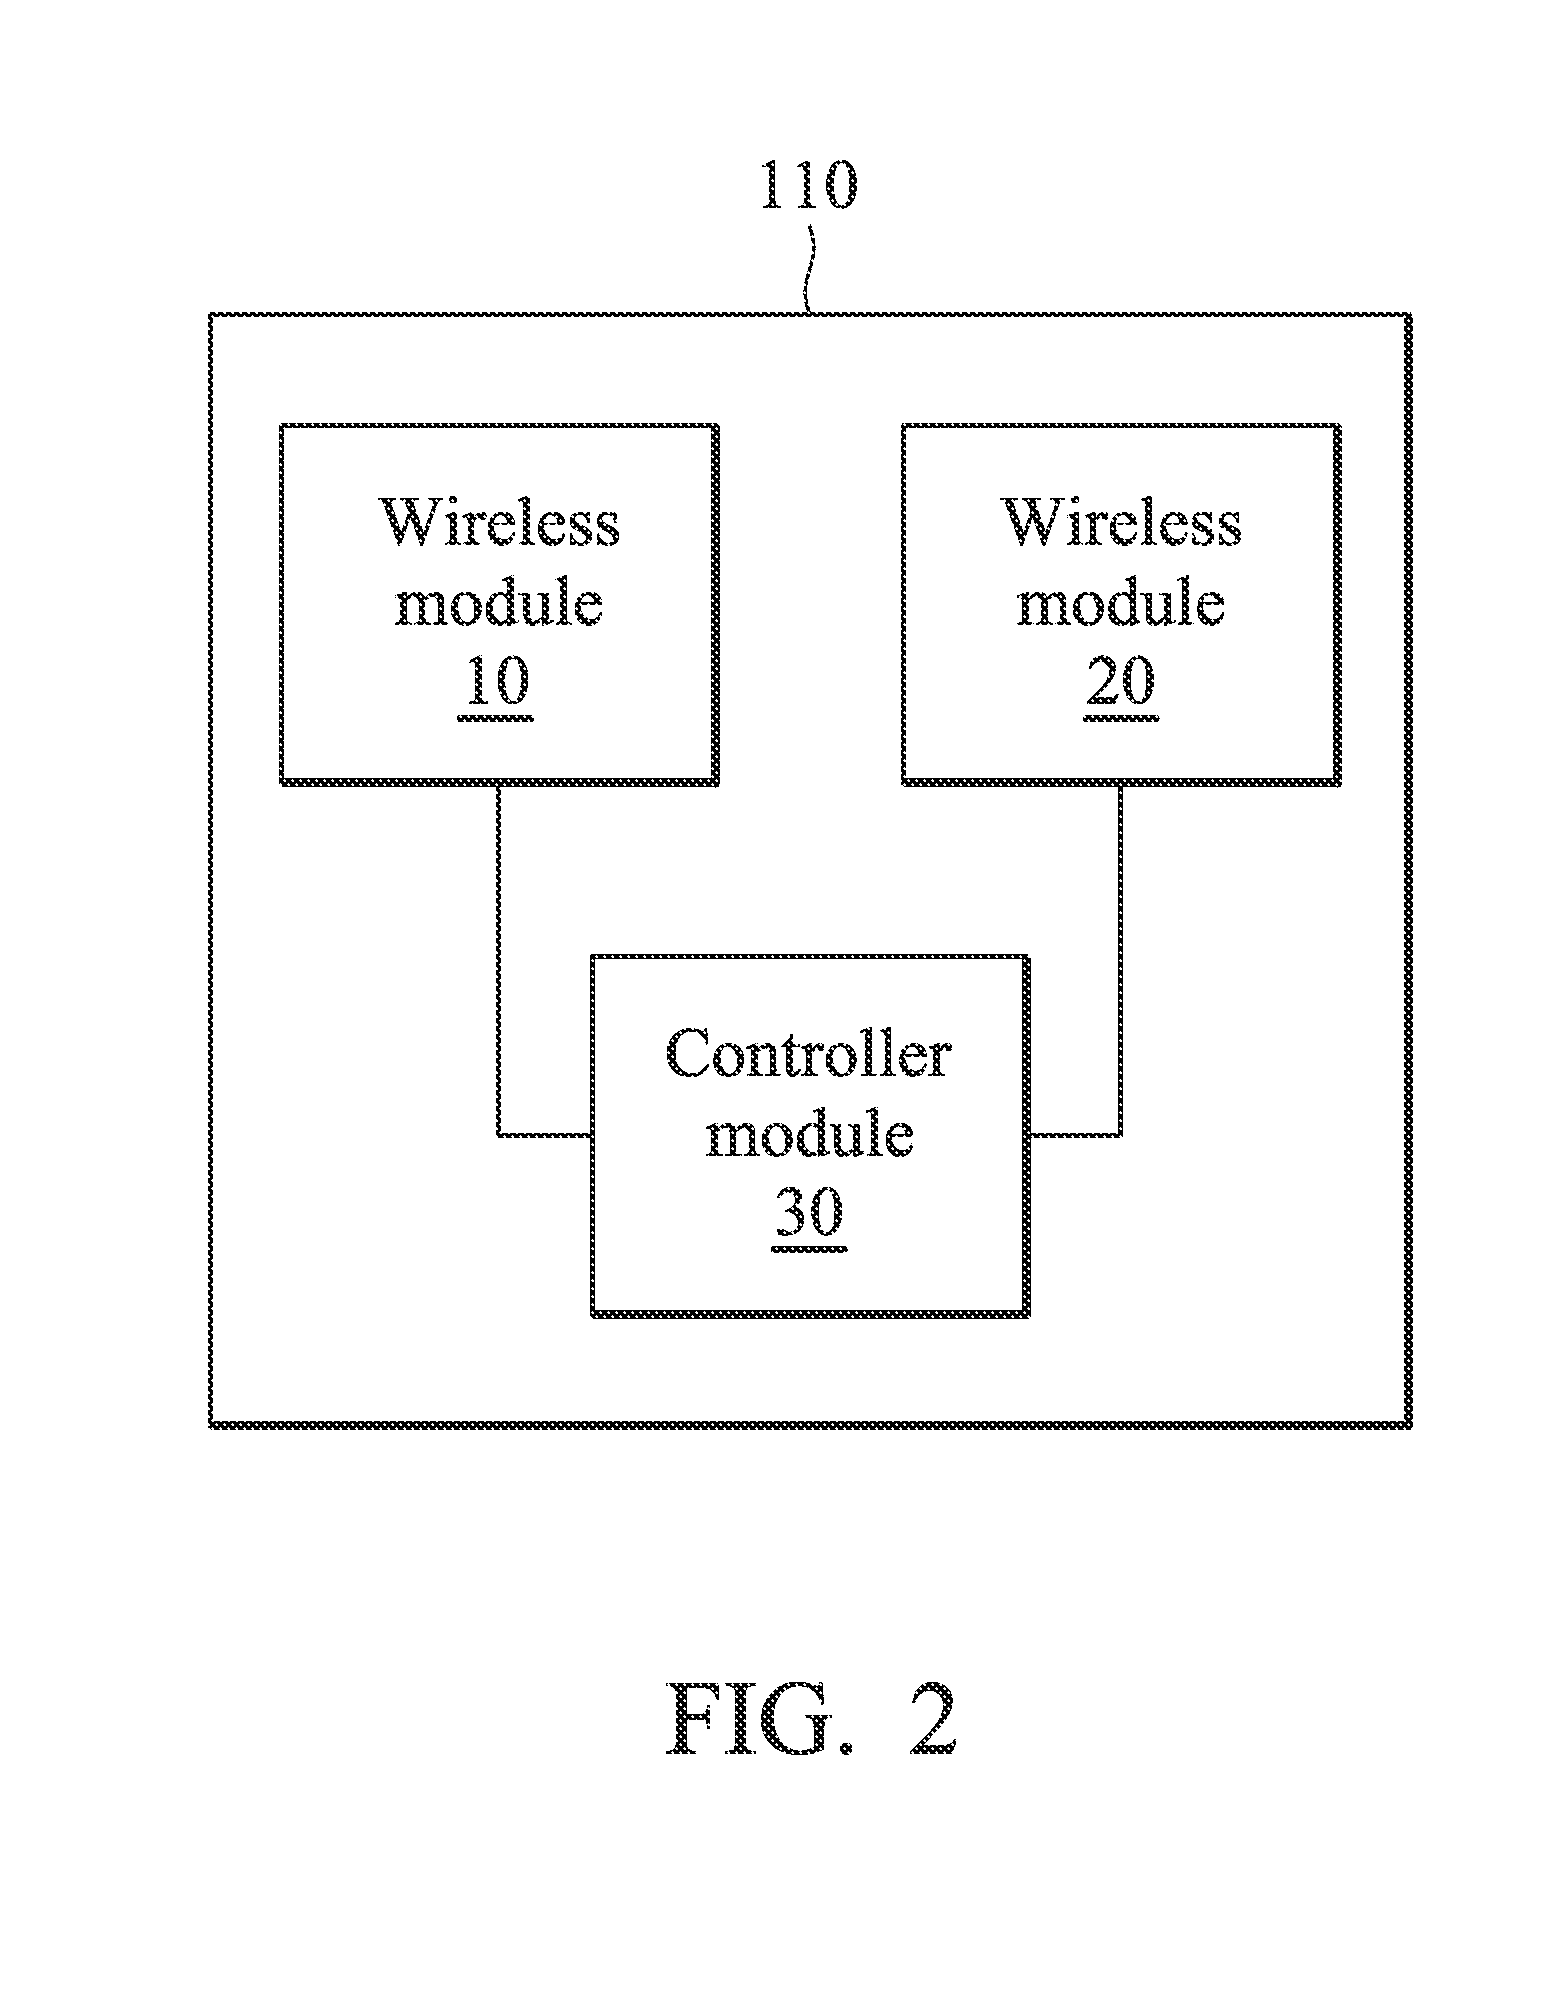 Apparatuses, systems, and methods for offloading data traffic